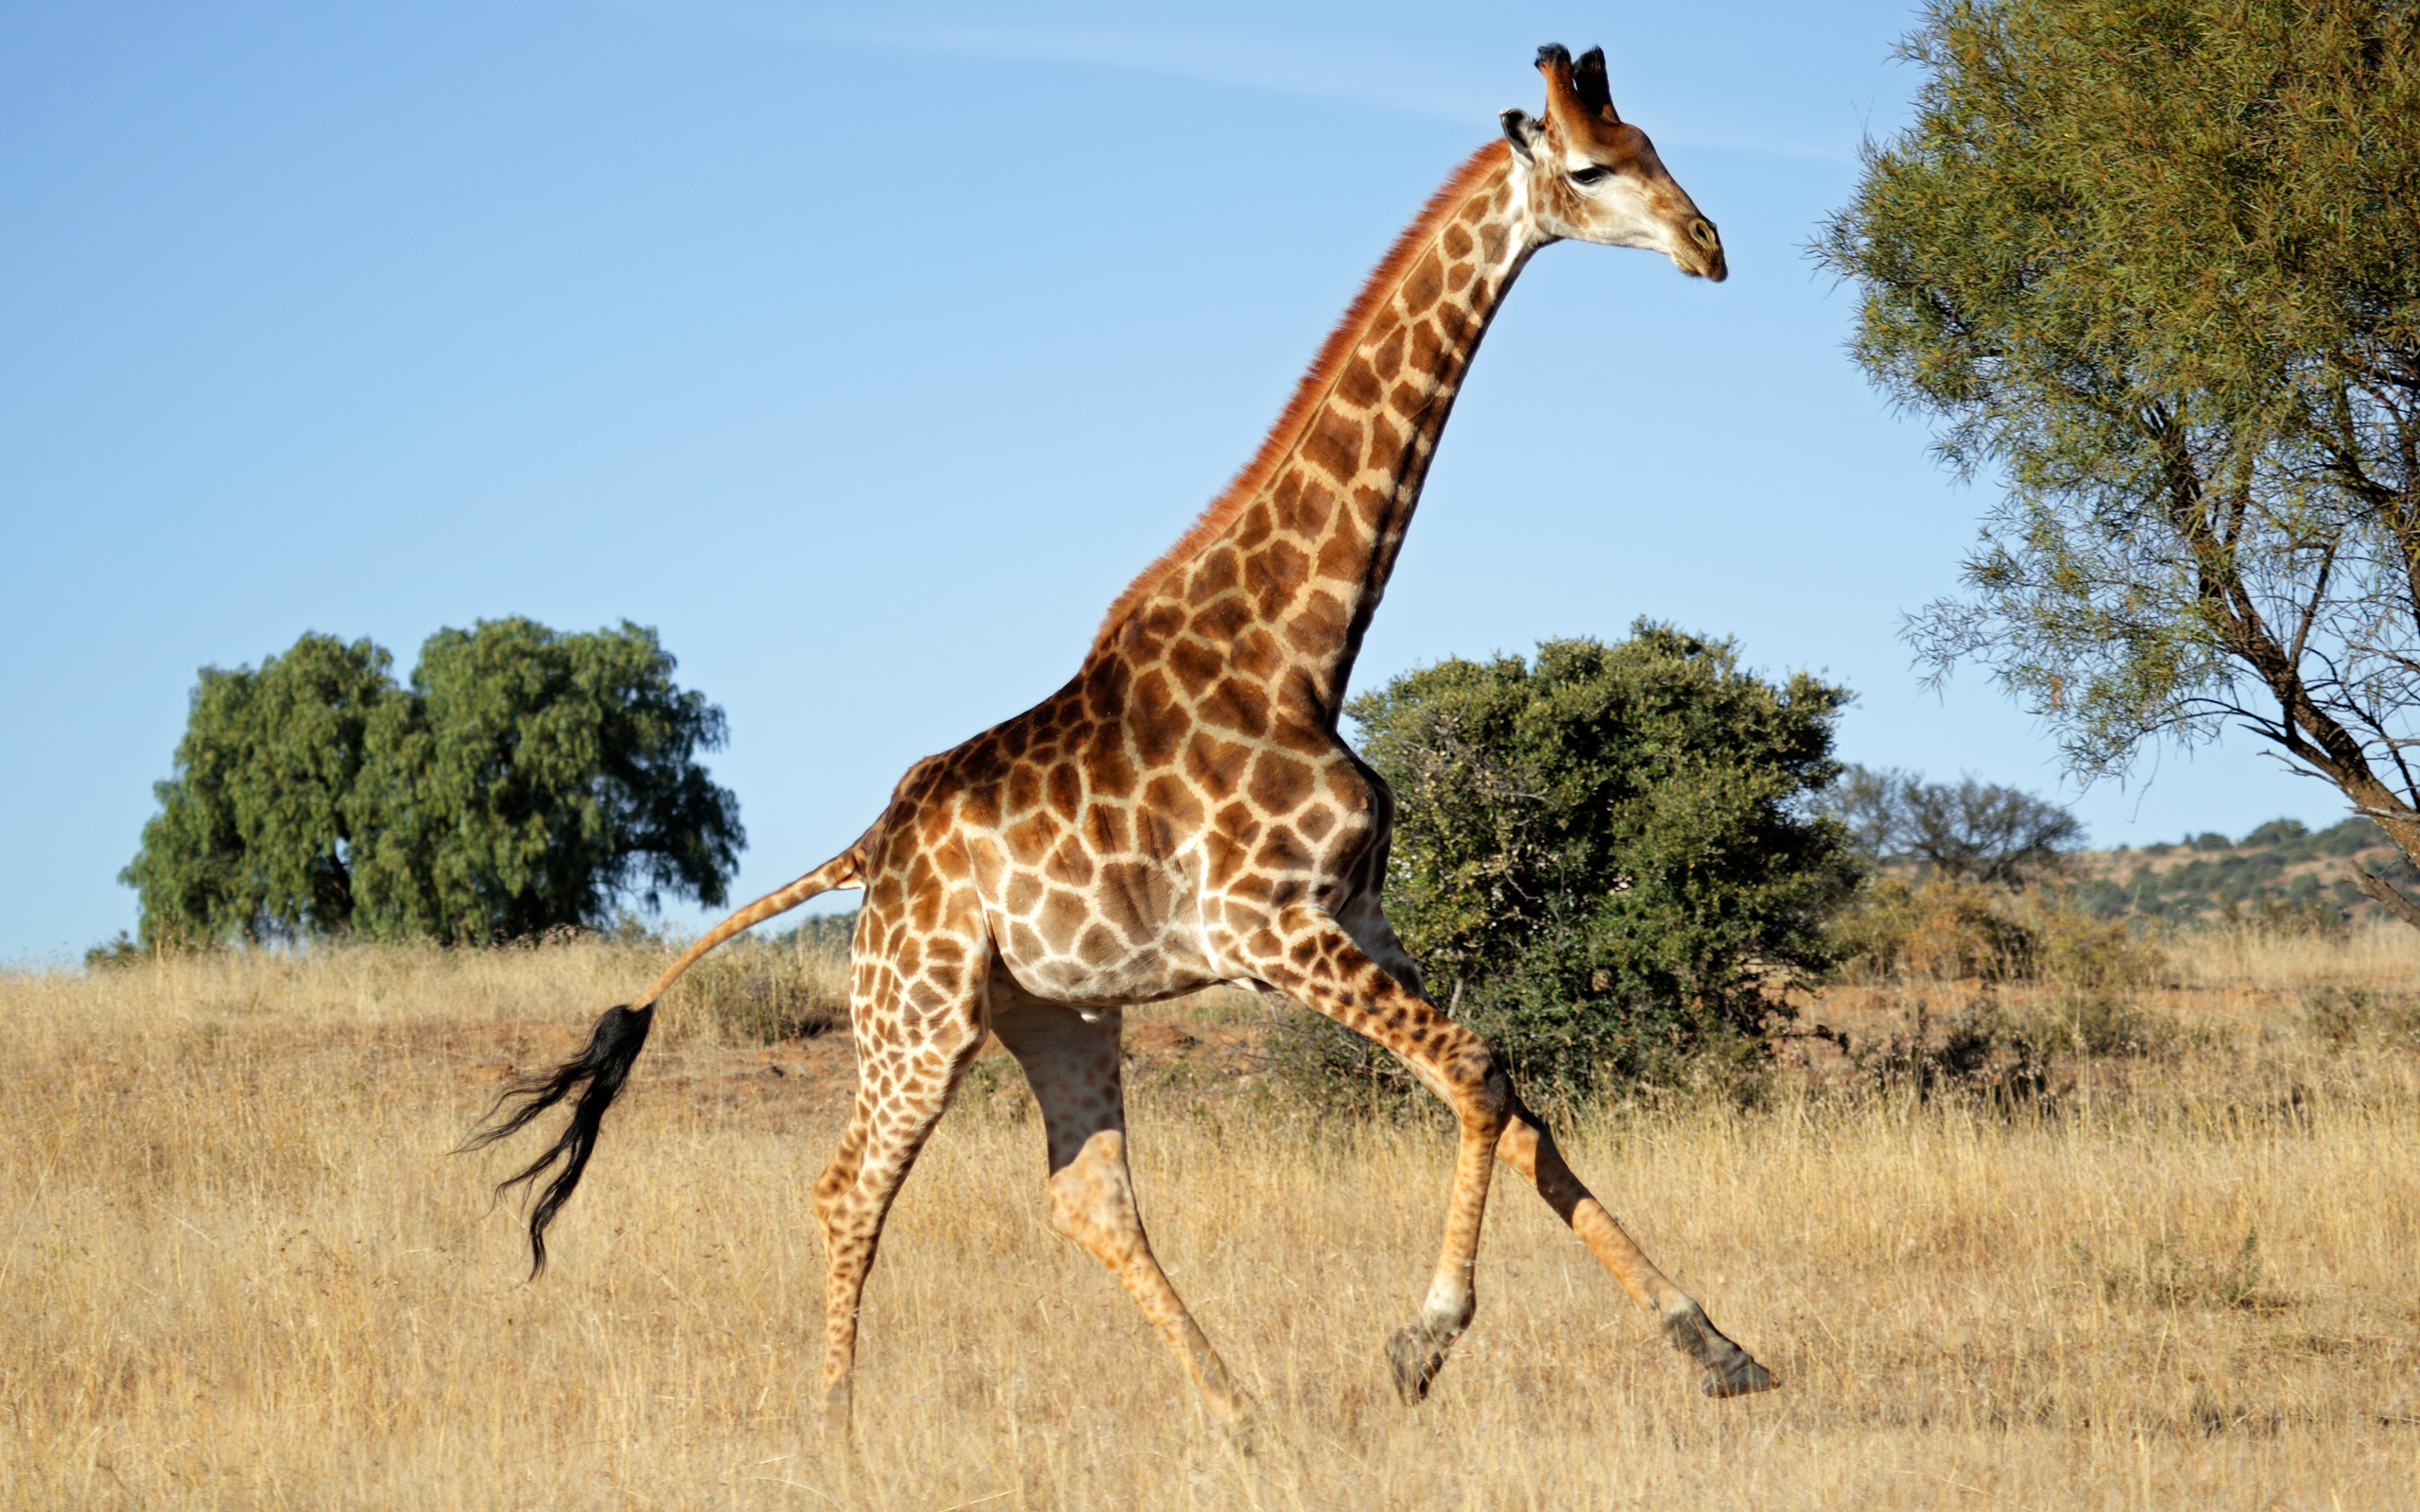 The Animal with the Longest Neck: The Giraffe